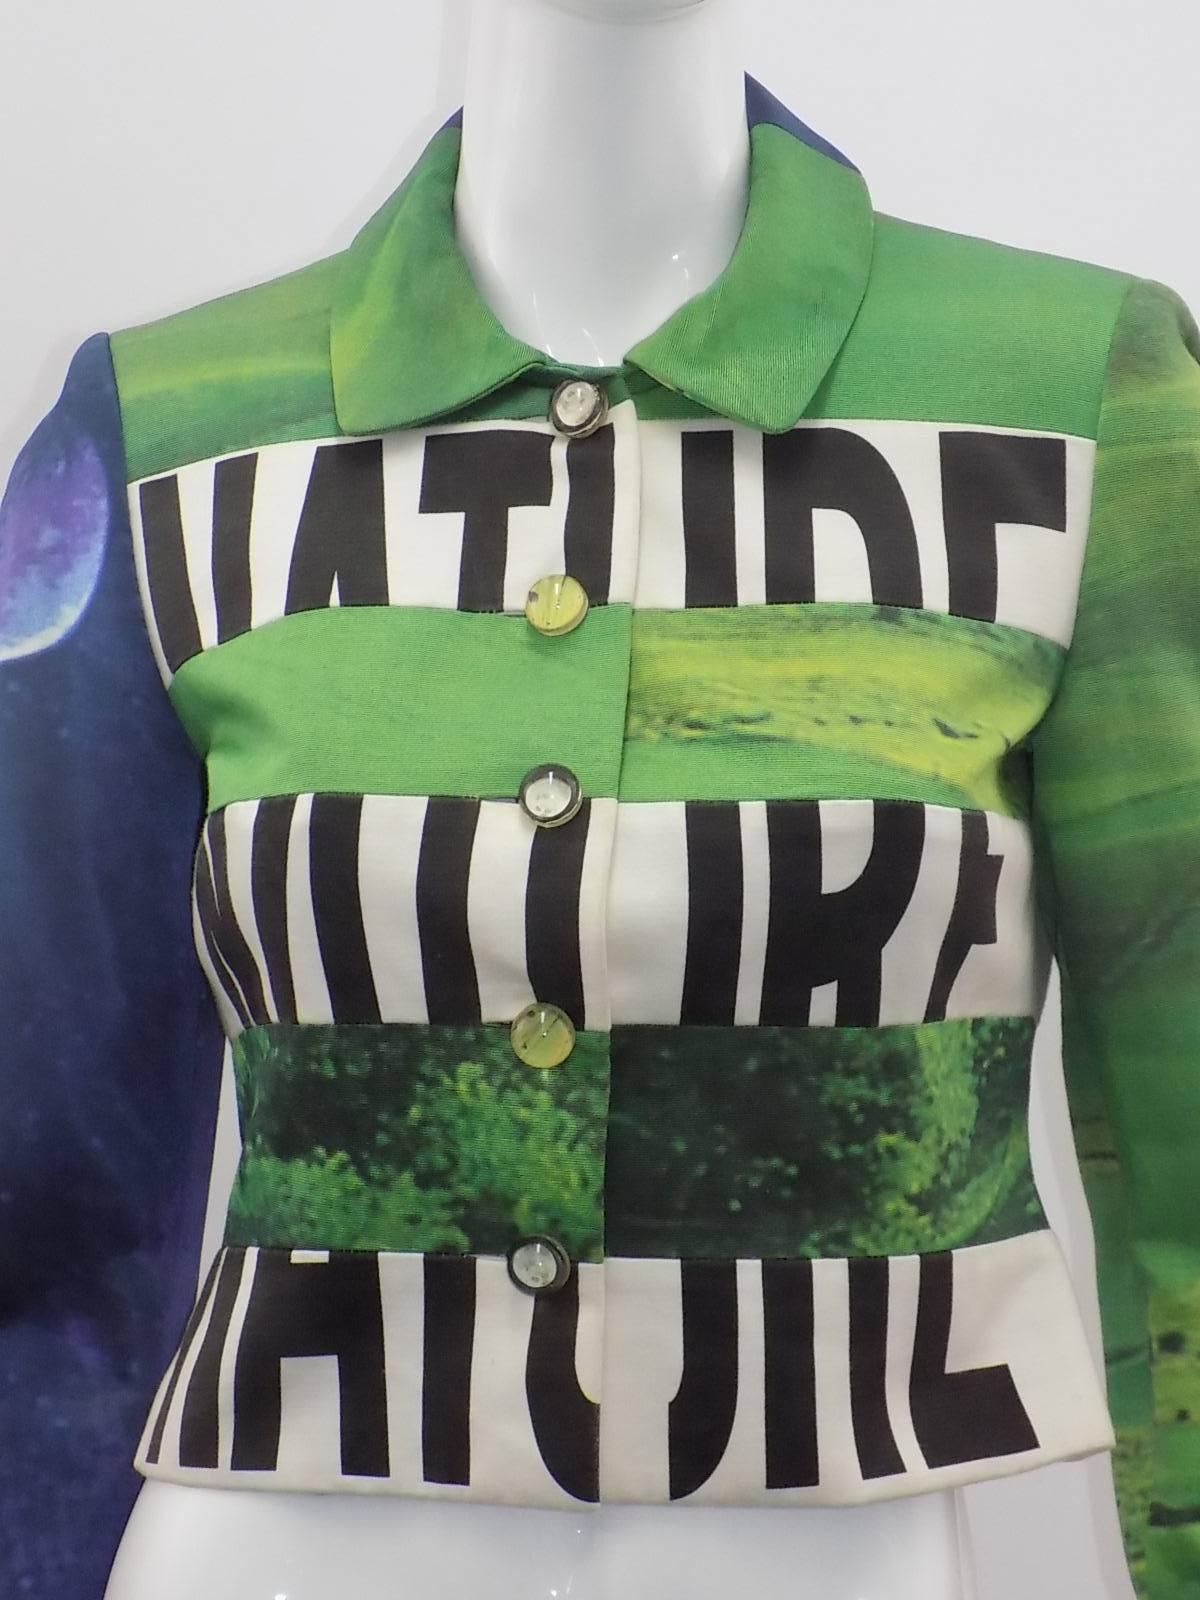 Totally chic vintage Moschino suit jacket featuring their legendary ode to the 90s Green Movement, with the words 